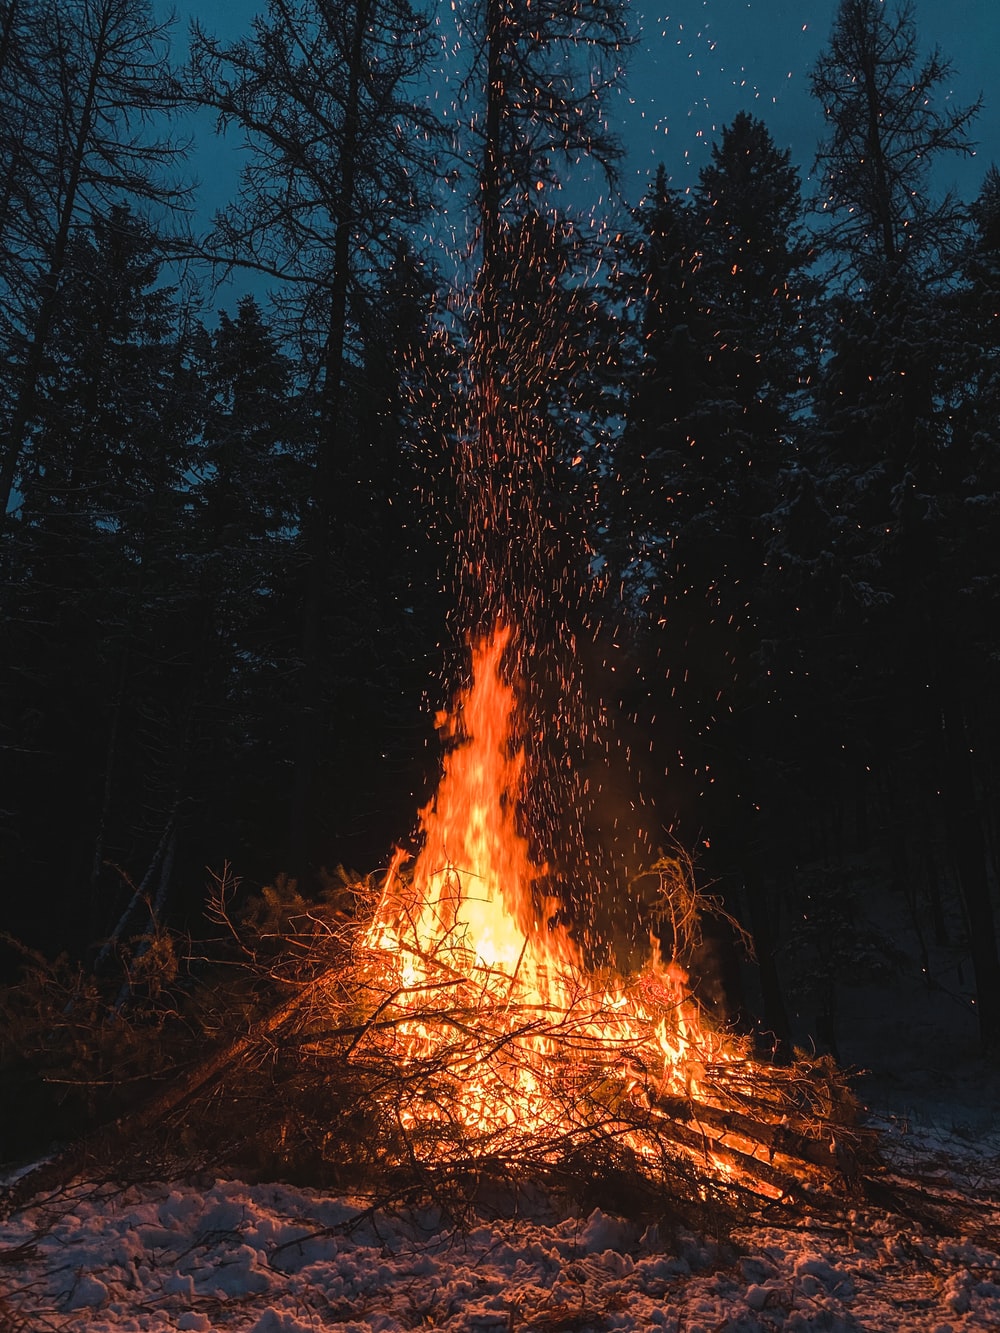 Snow Fire Picture. Download Free Image